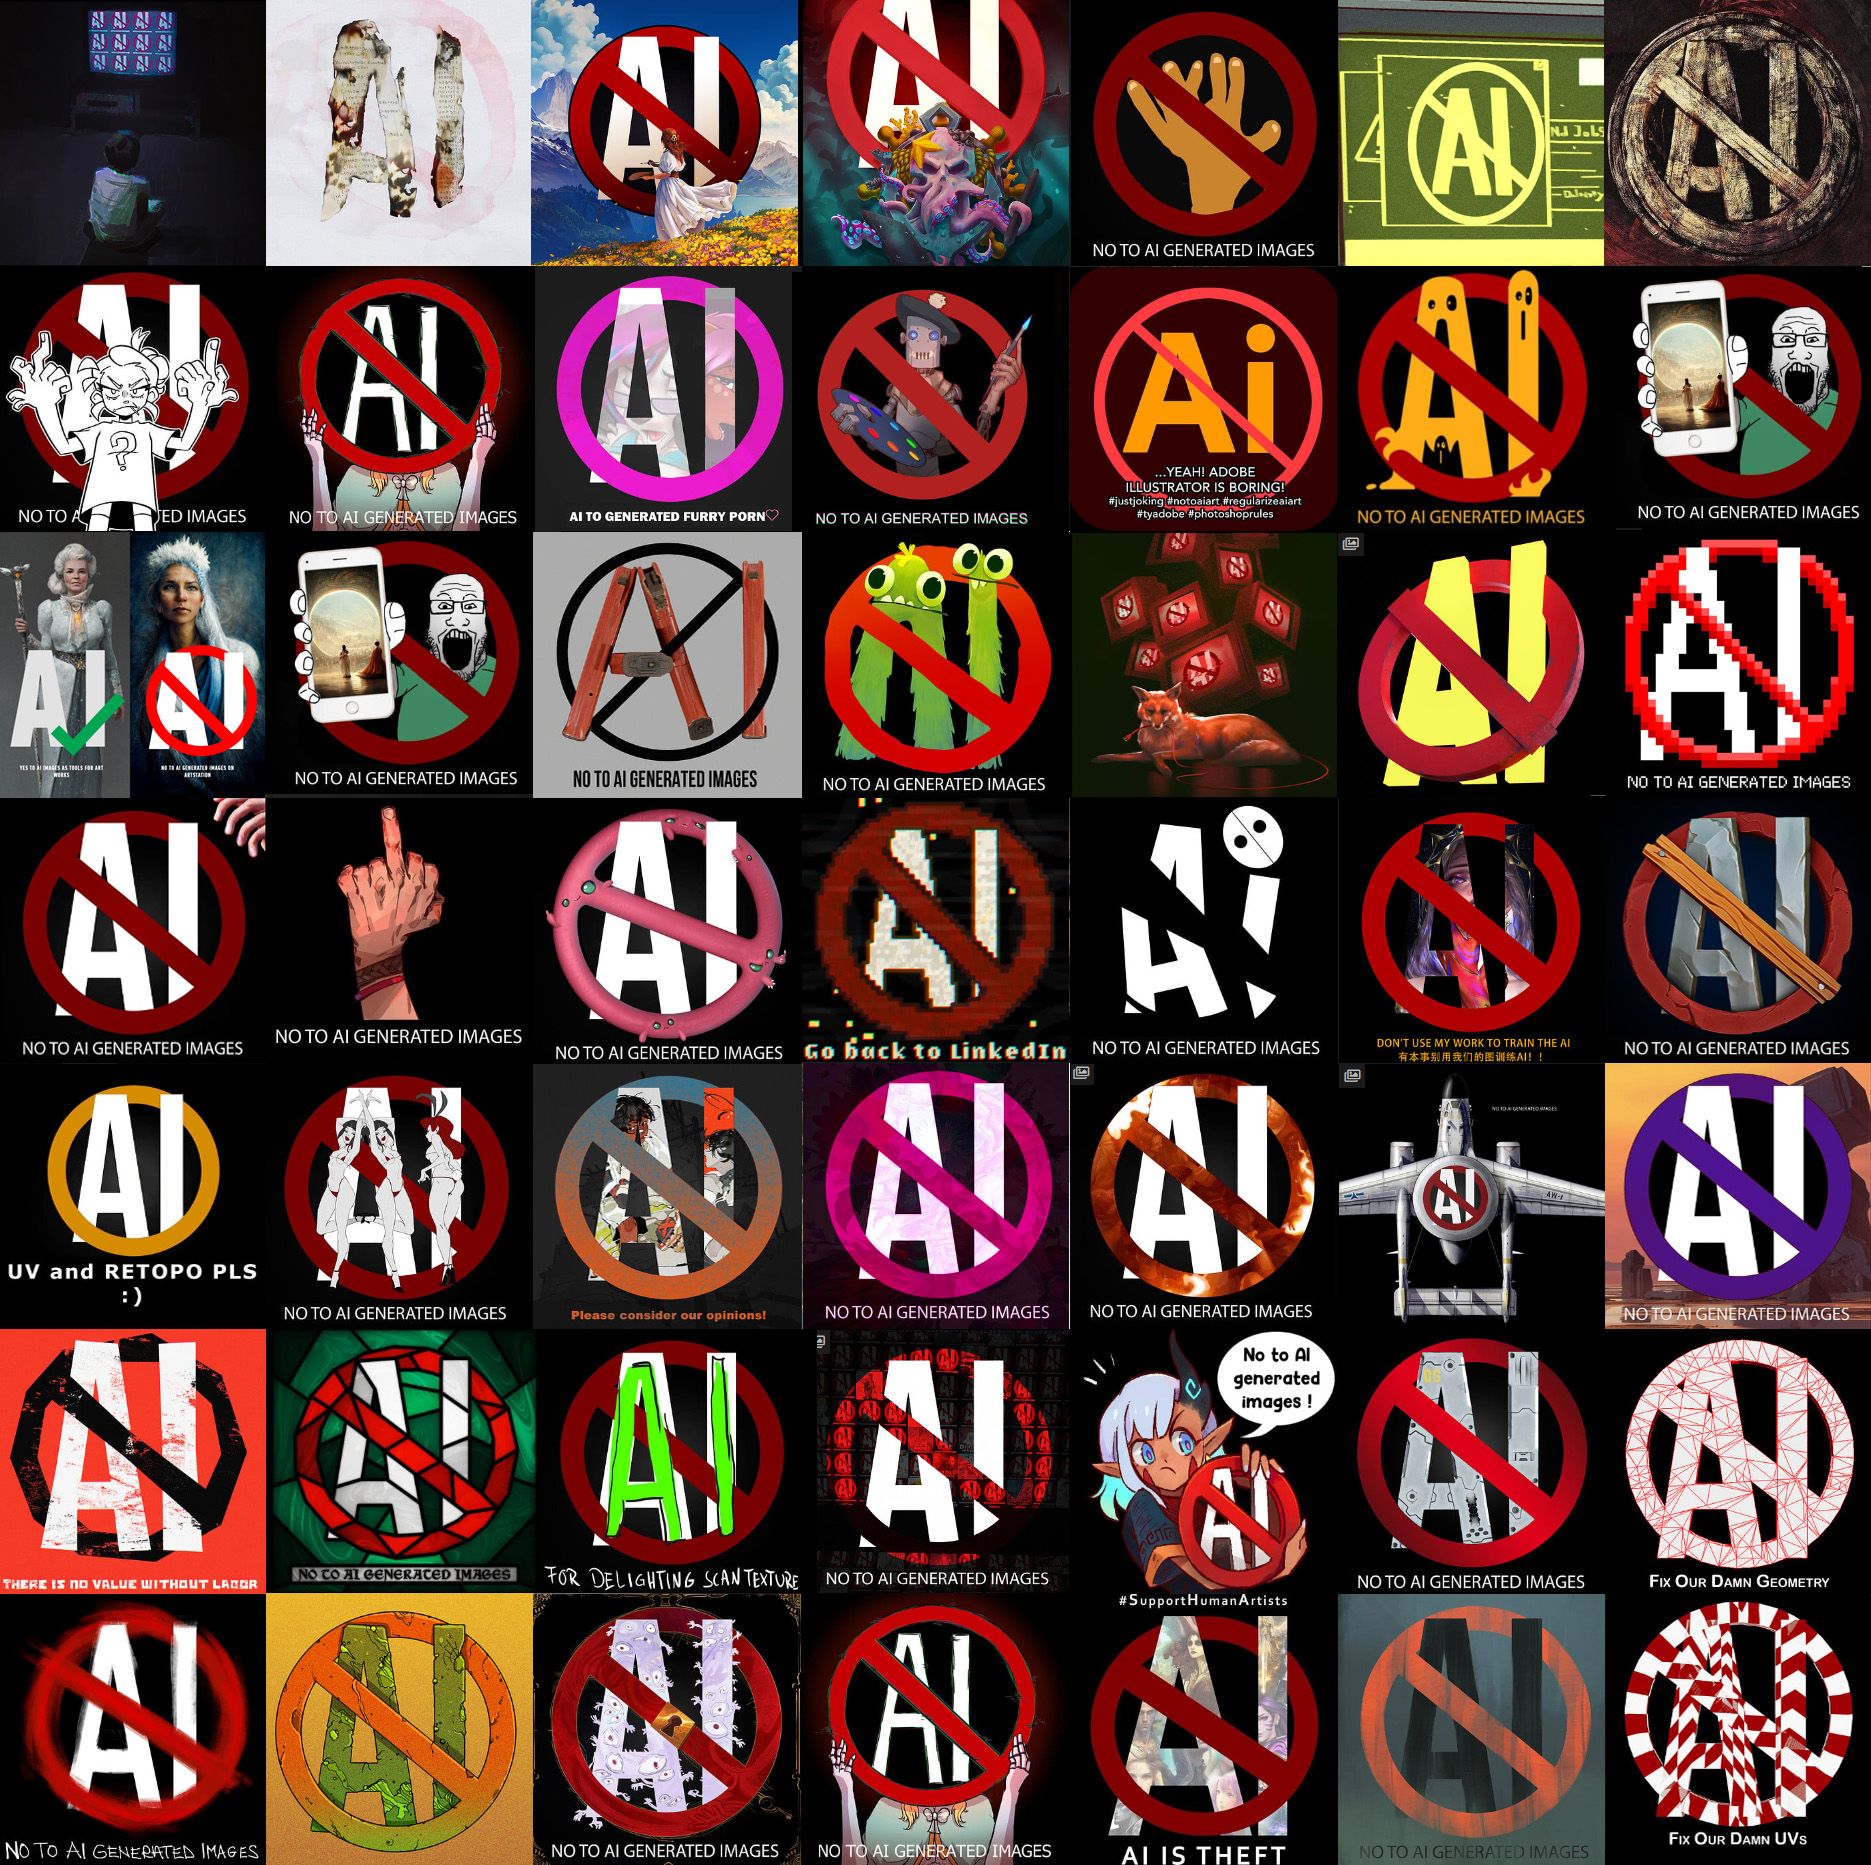 A grid of images in various styles that all show the word "AI" crossed out.